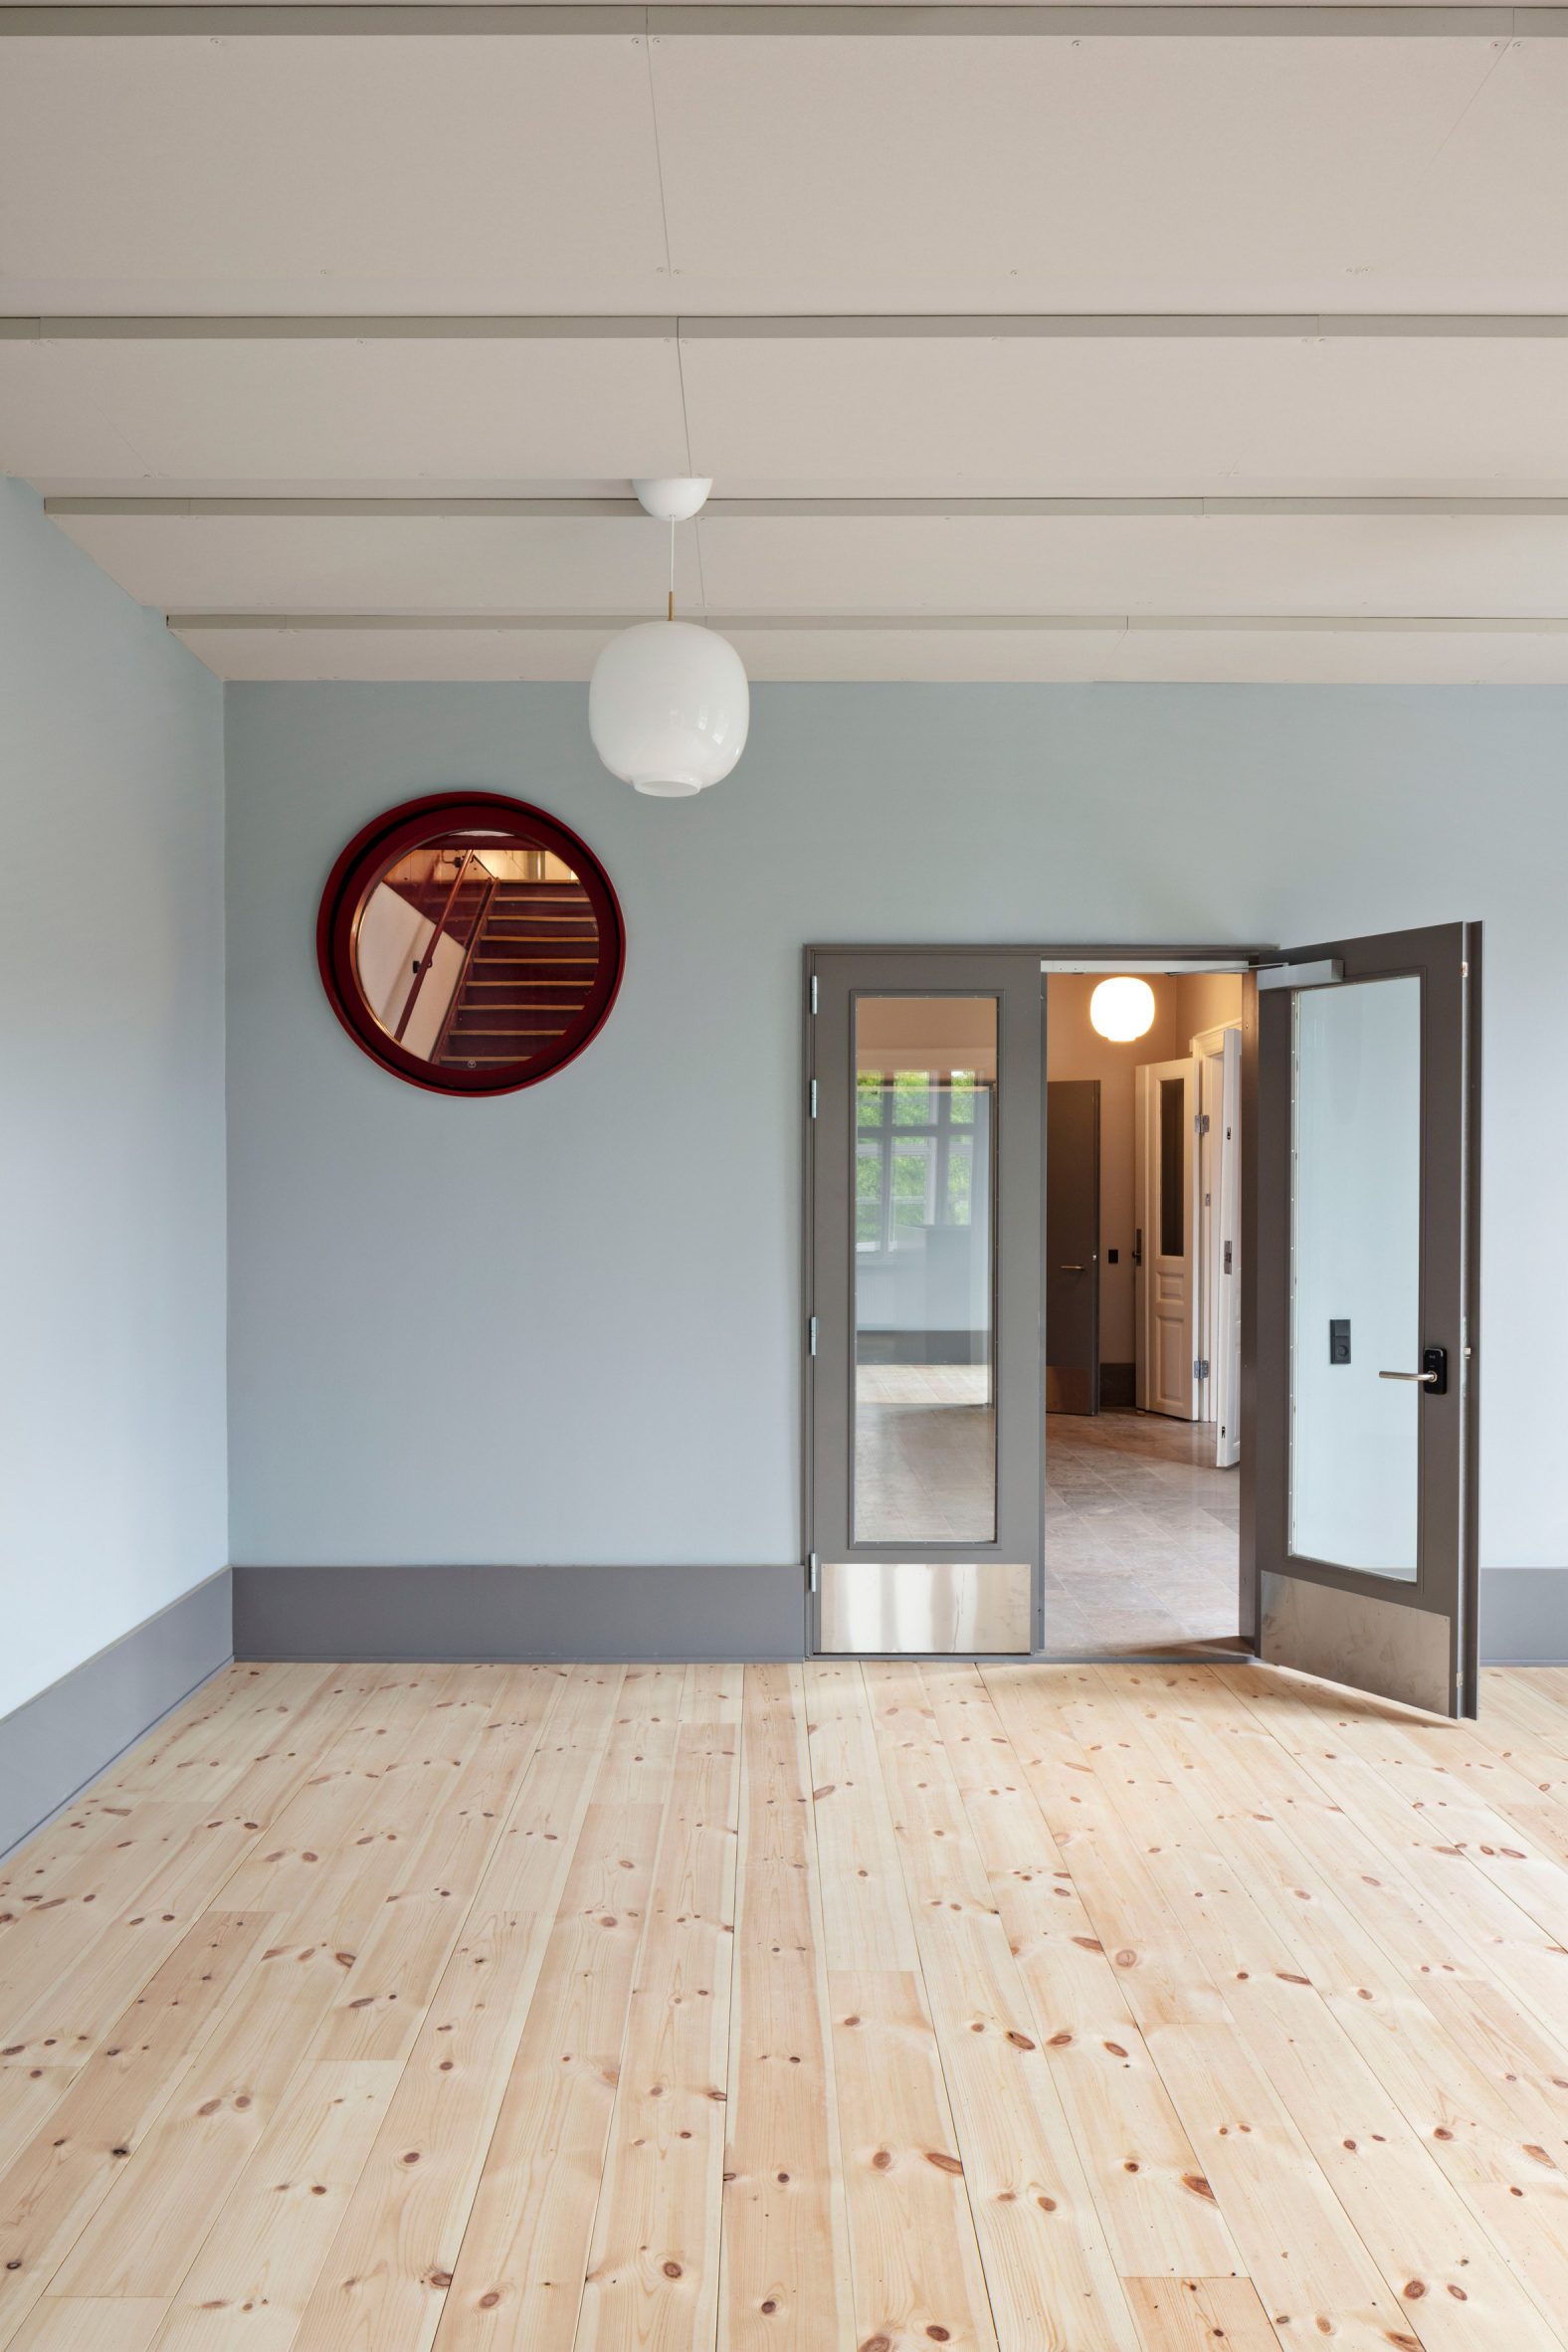 A shared space has blue painted walls and light wood floors